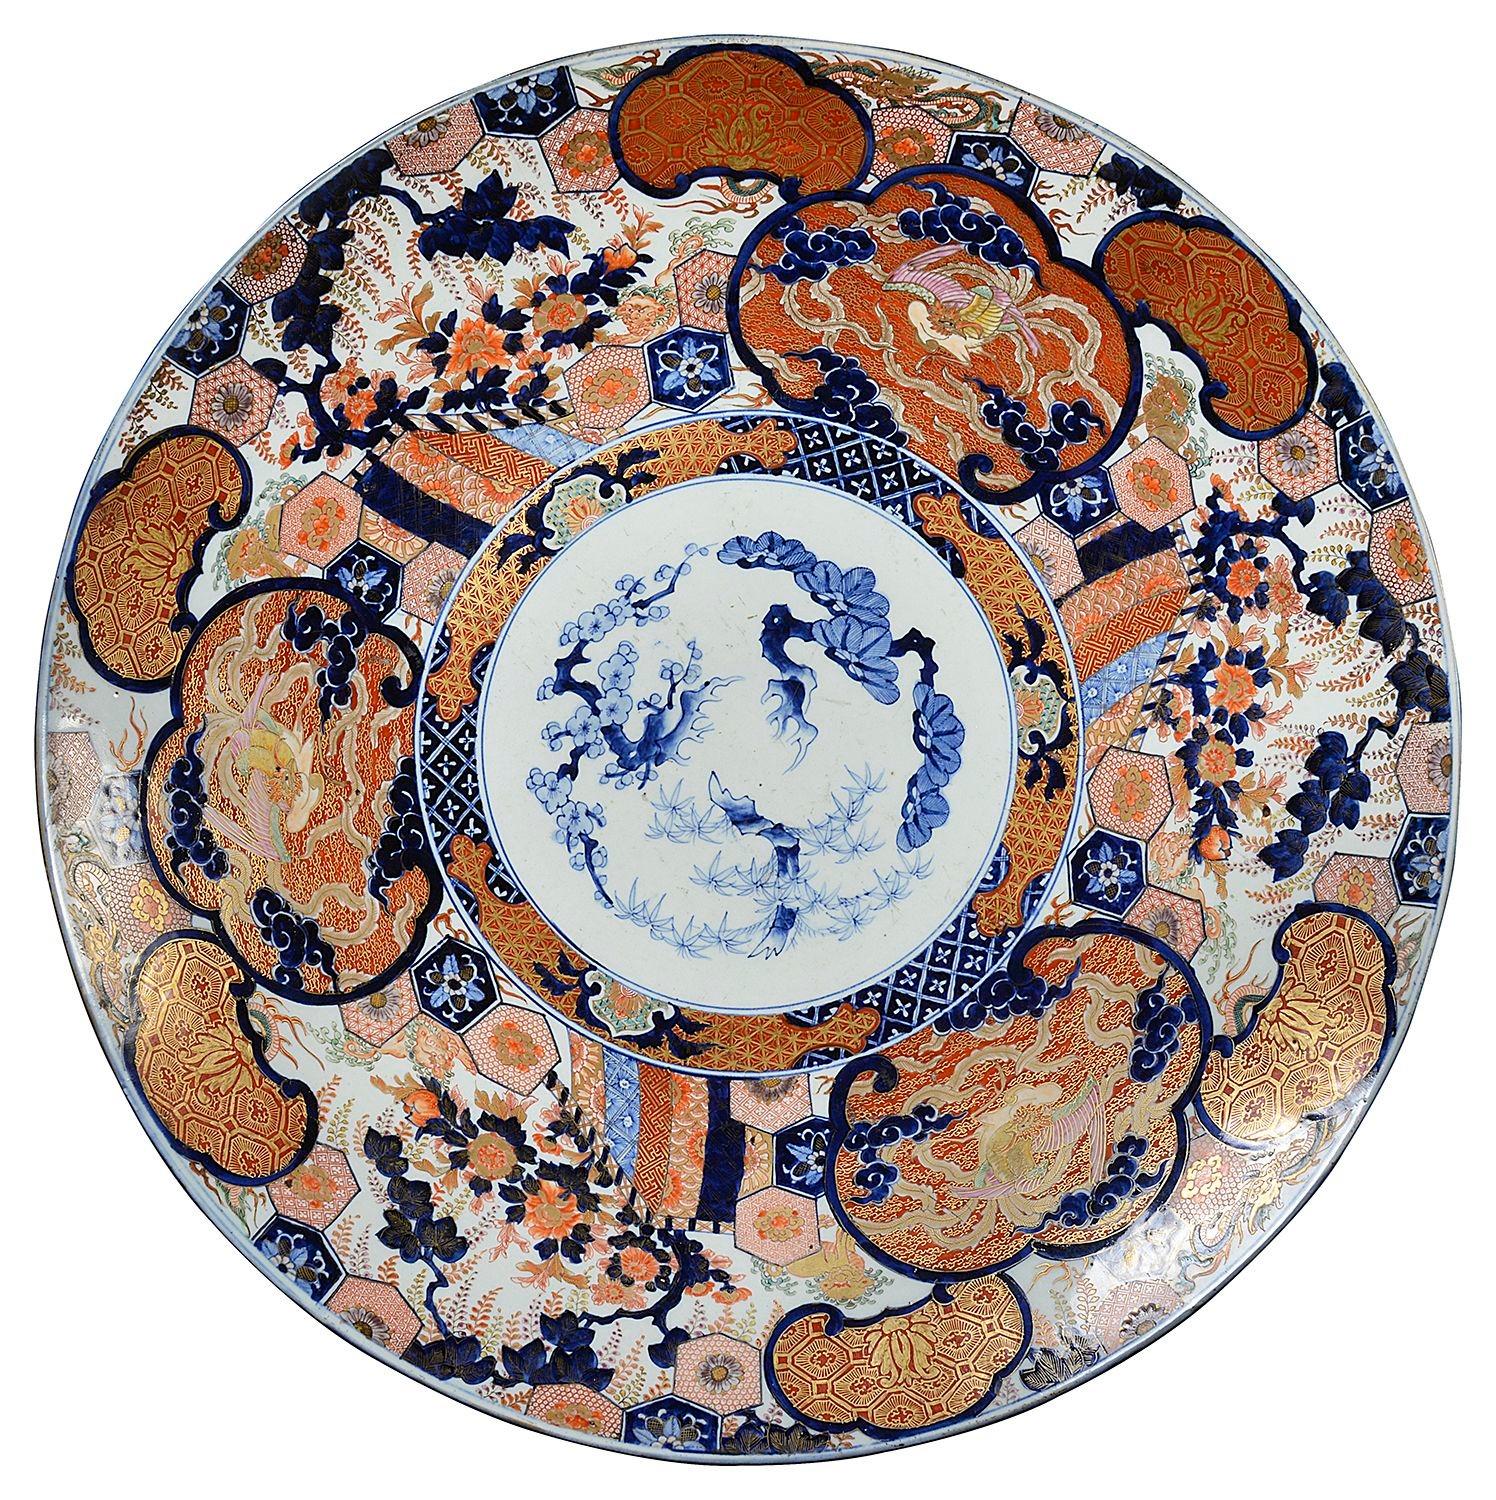 Large 19th Century Japanese Imari charger, having wonderful gilded and bold colouring, depicting hand painted classical motifs, blossom trees, exotic flowers and birds.
Including a brass plate stand.

Batch 78 62743 ANKZ